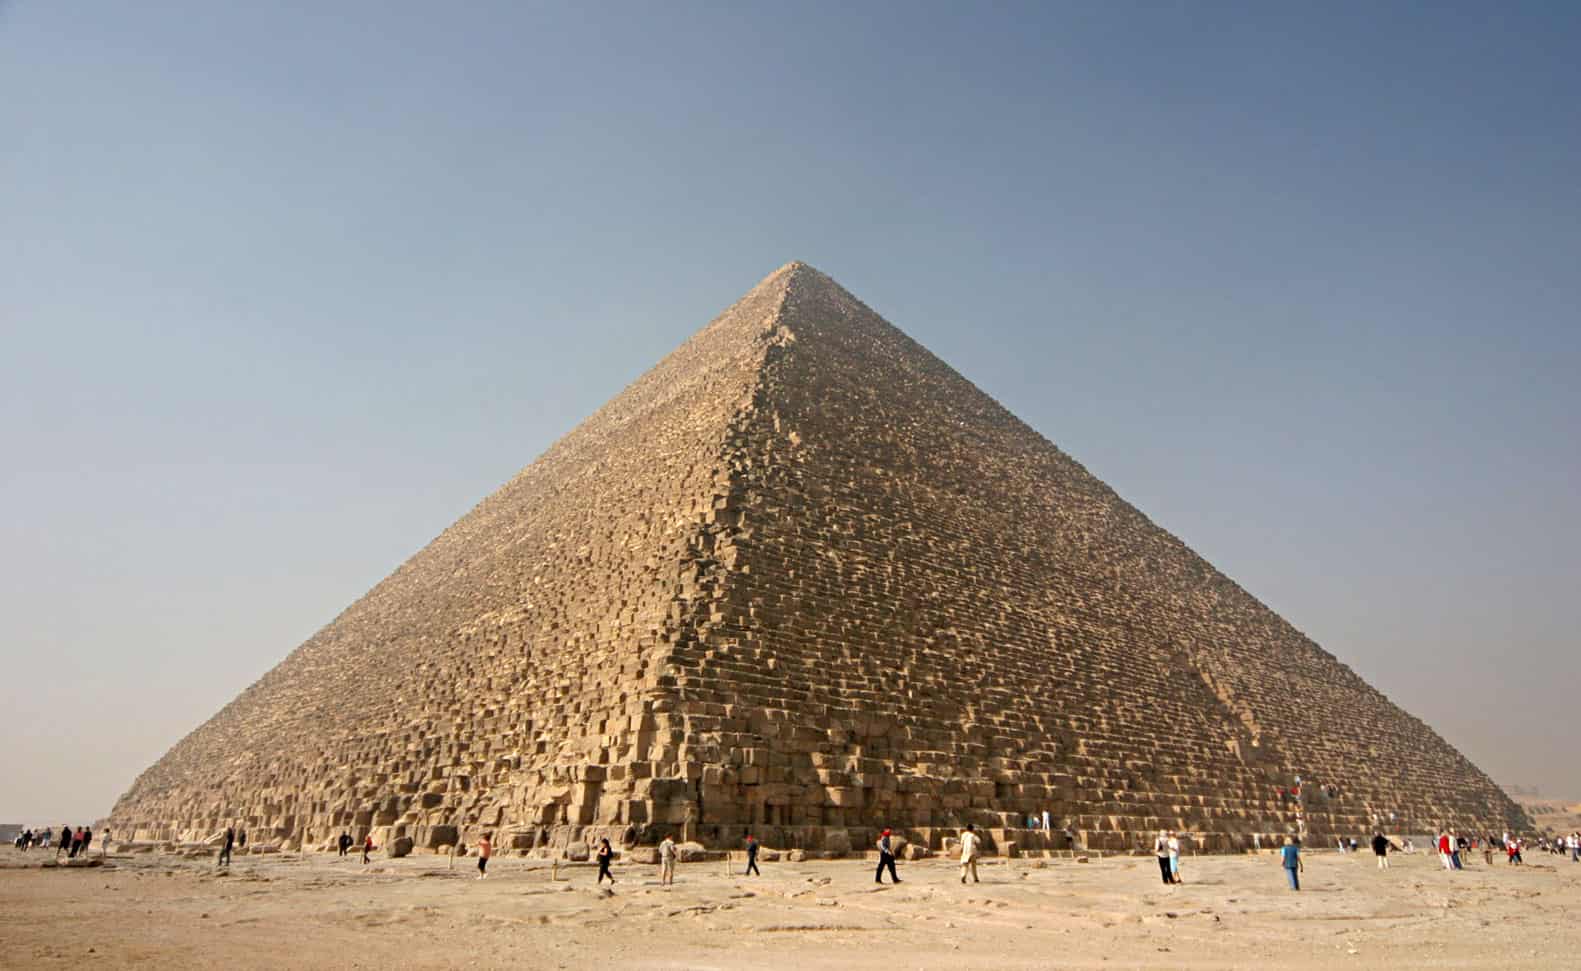 Archaeologists uncover secret tunnel contained in the Great Pyramid of Giza